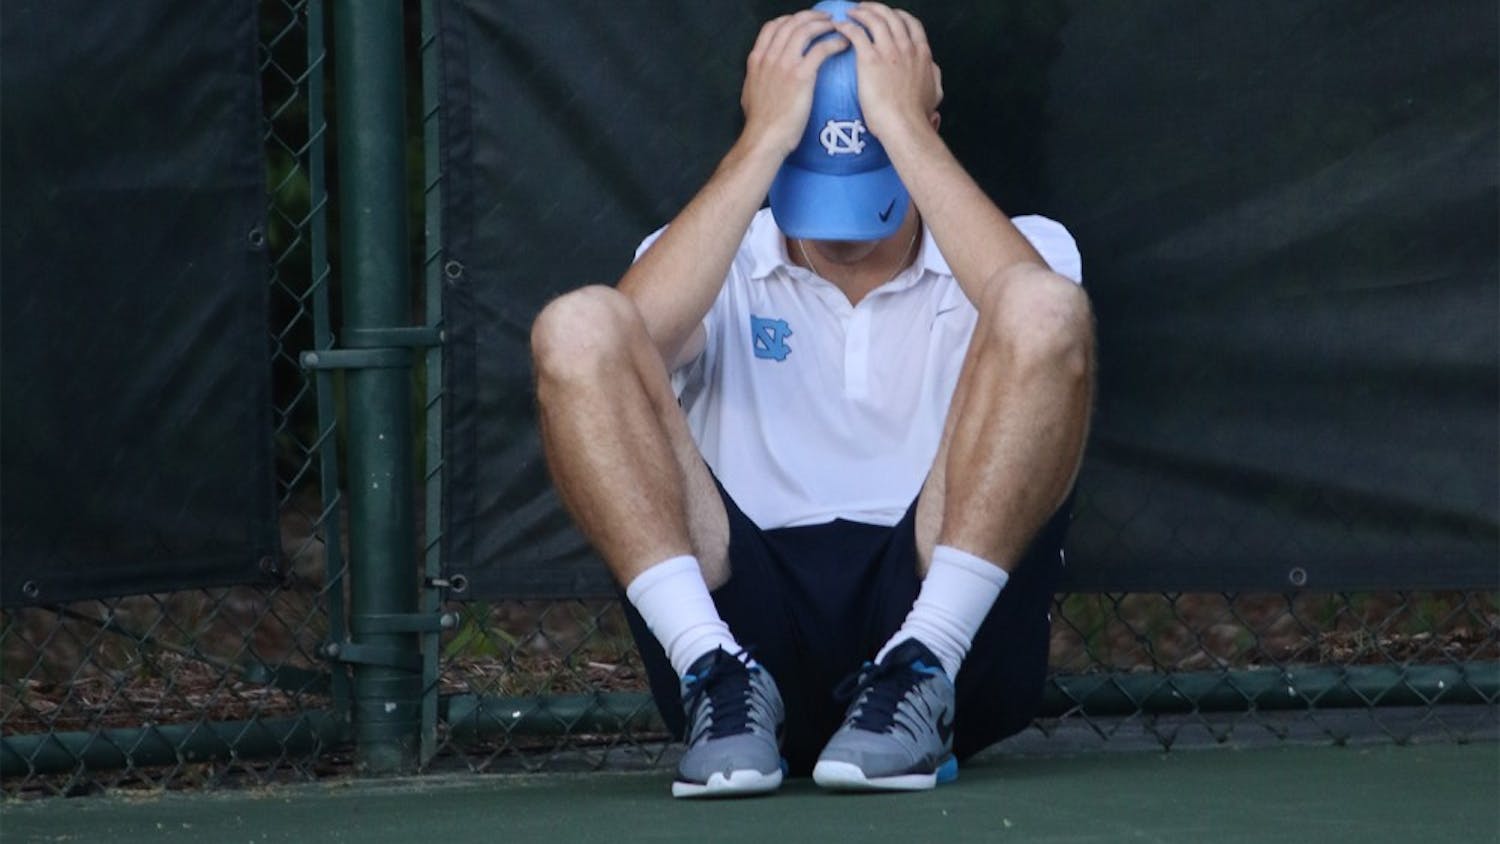 Sophomore Robert Kelly sits in isolation after losing 7-5 in a vital tiebreaker in the third set of his singles match. The UNC men's tennis team lost 4-3 to the University of Virginia in the AC semi-finals on Saturday.